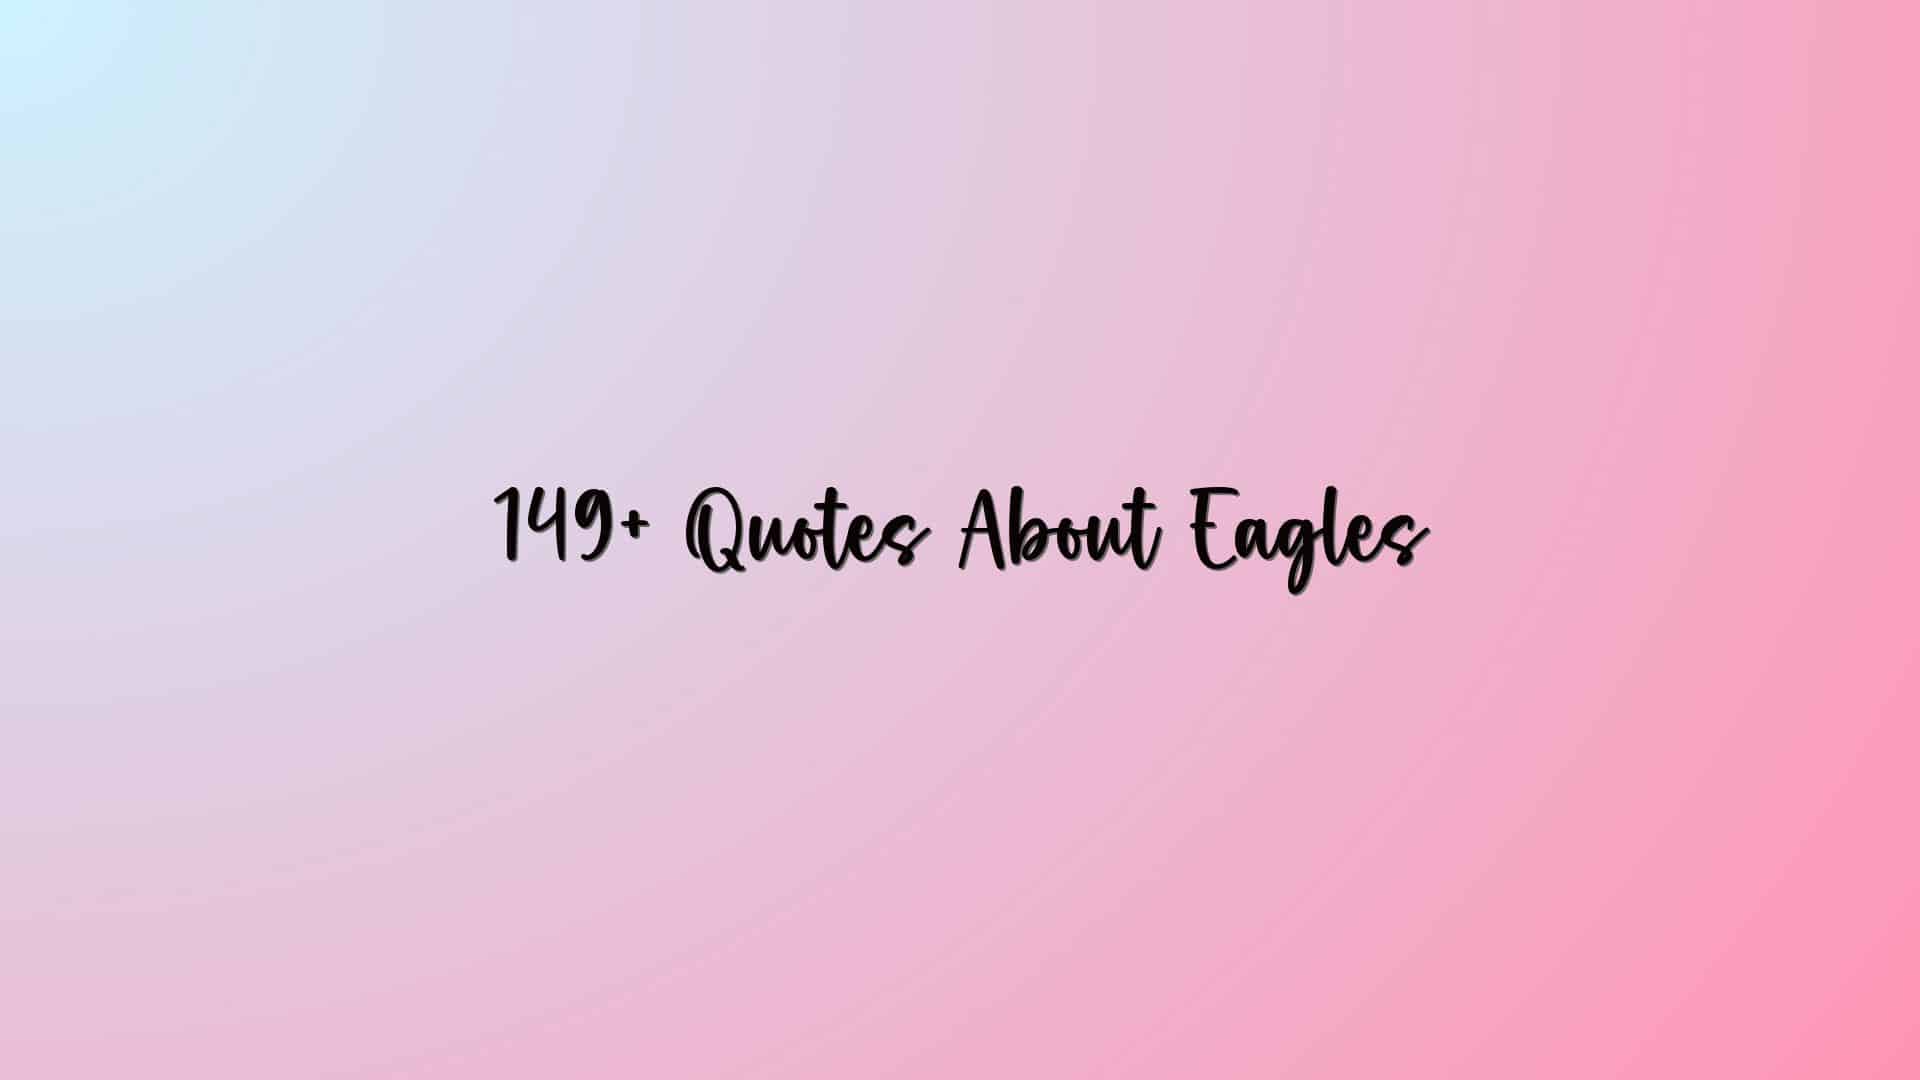 149+ Quotes About Eagles